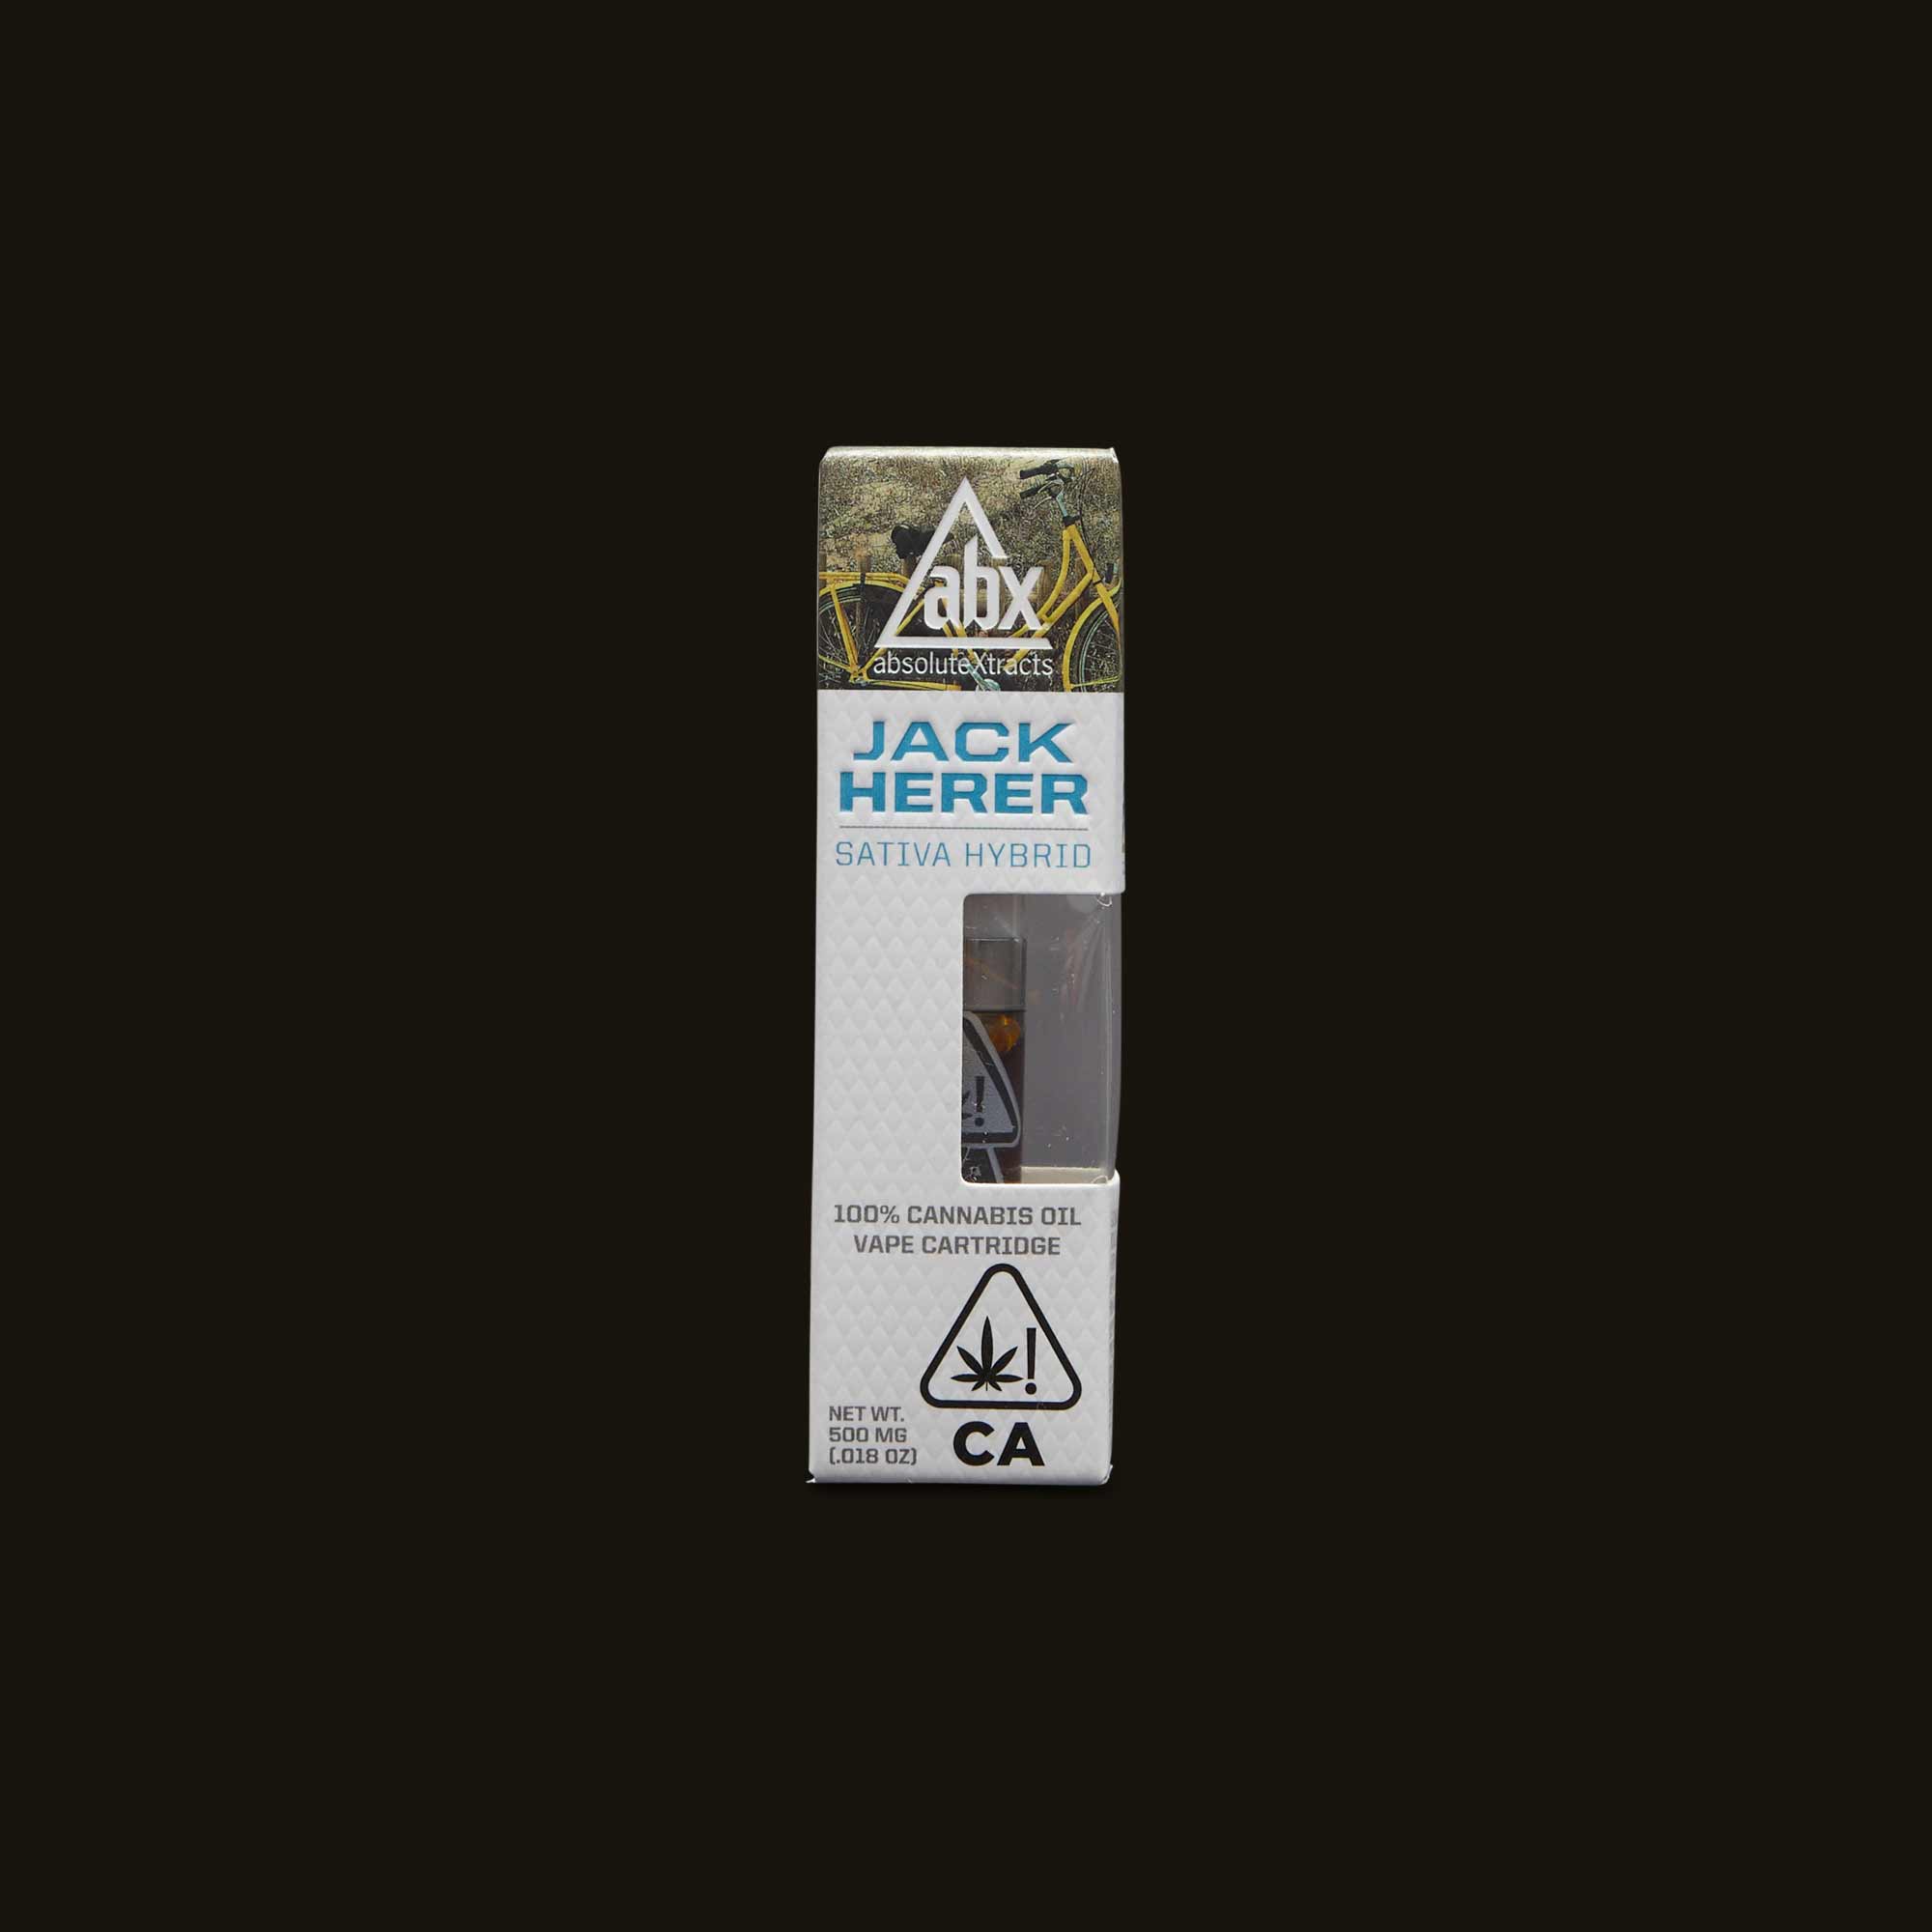 AbsoluteXtracts-Jack-Herer-Vape-Cartridge-Front-Box-CA-0567-787832